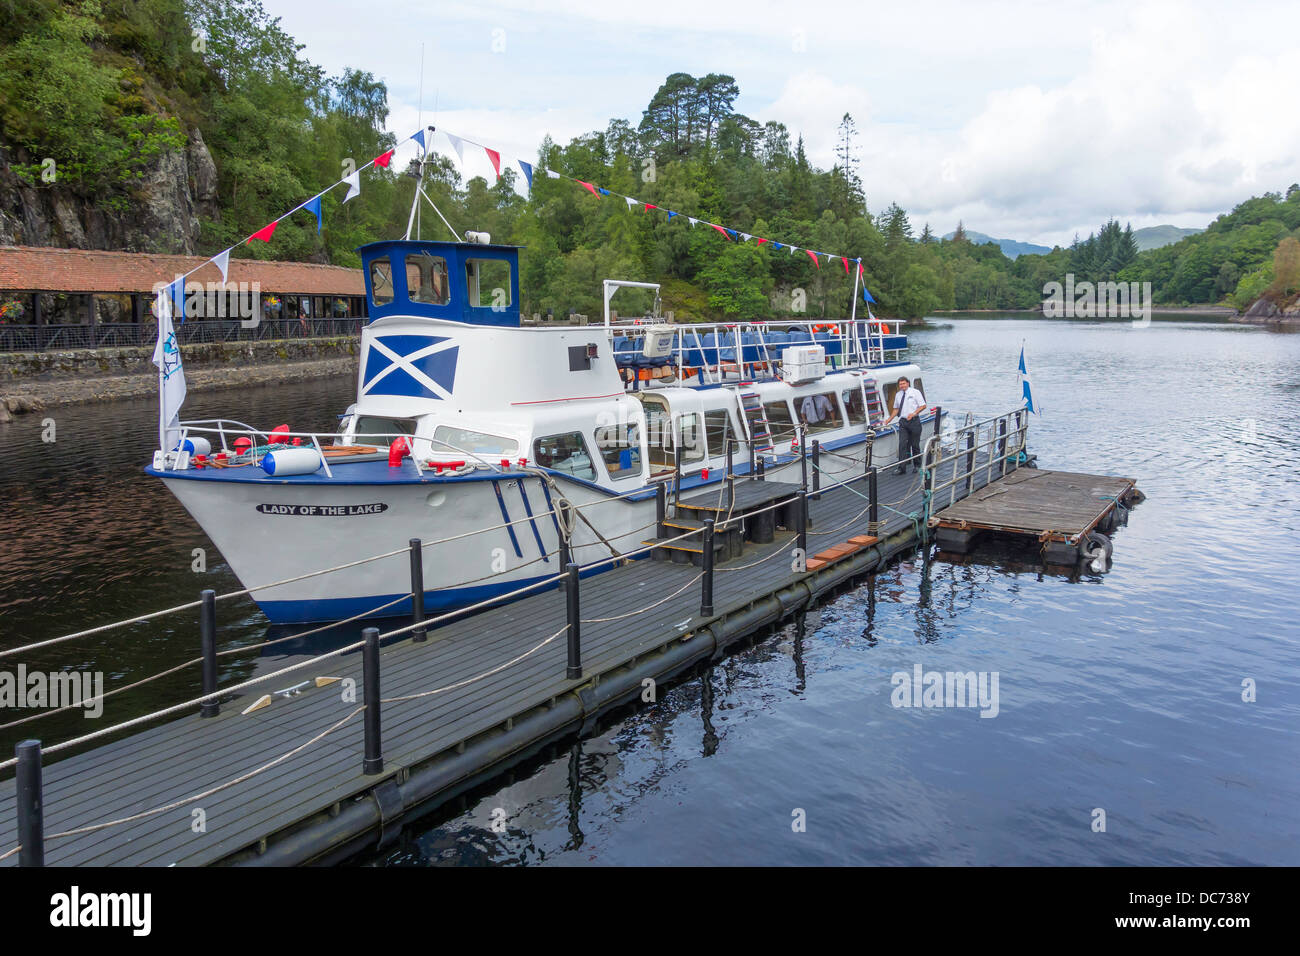 Pleasure boat 'Lady of the Lake' at the Trossachs Pier on Loch Katrine Scotland Stock Photo